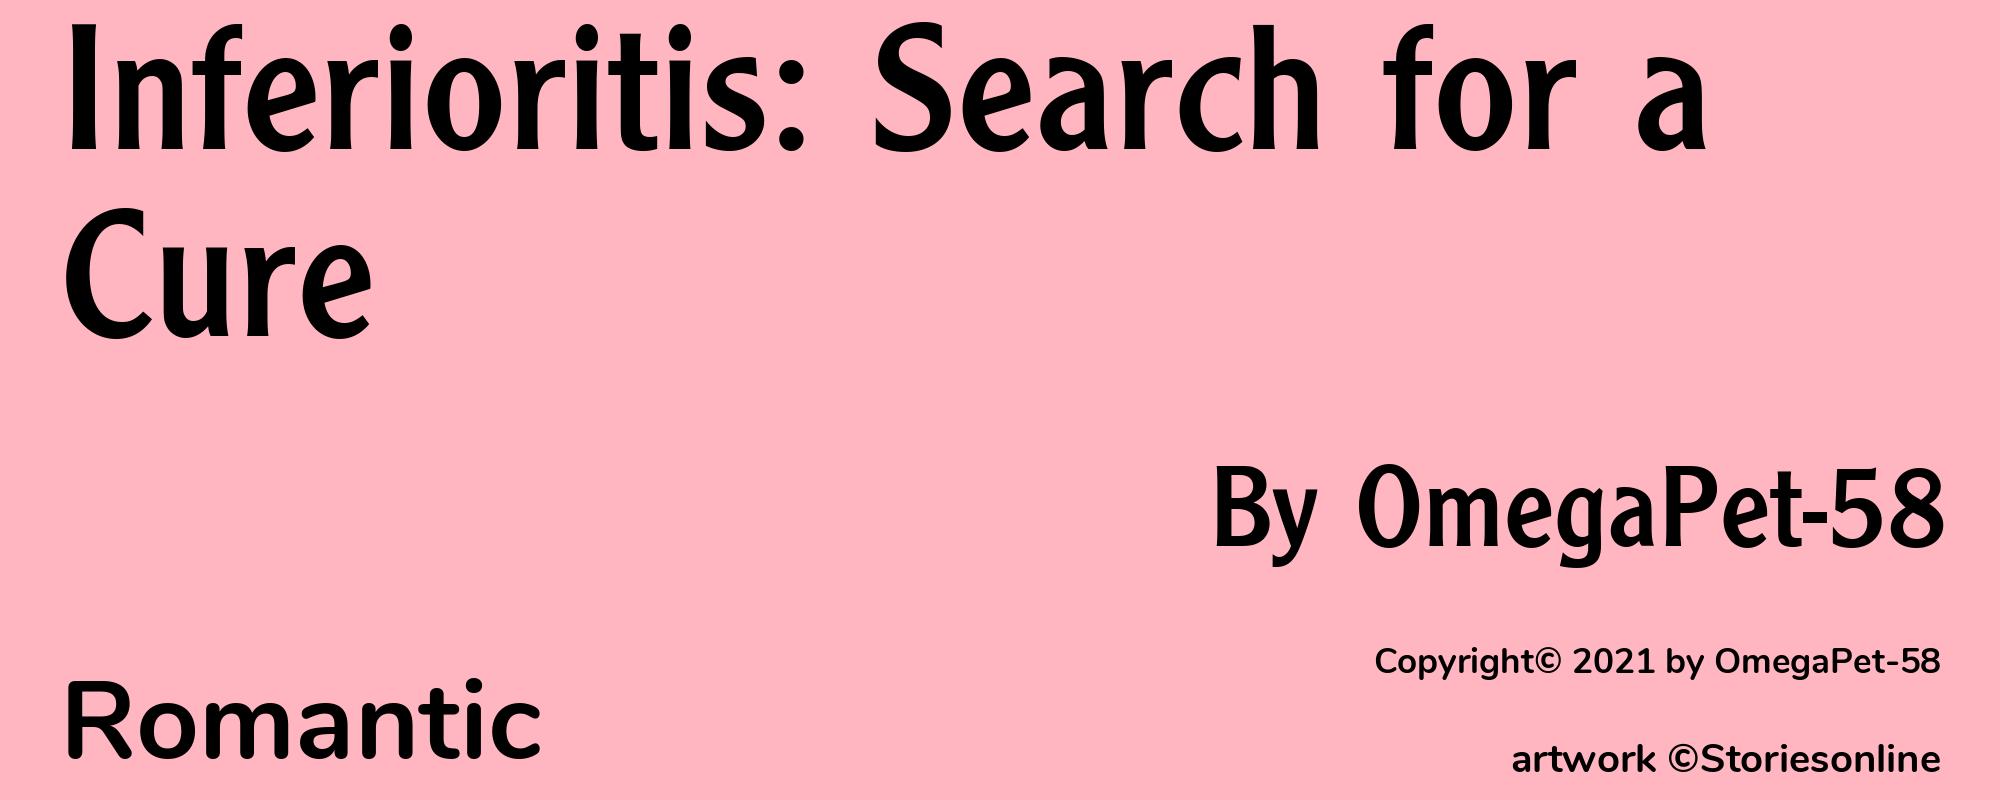 Inferioritis: Search for a Cure - Cover